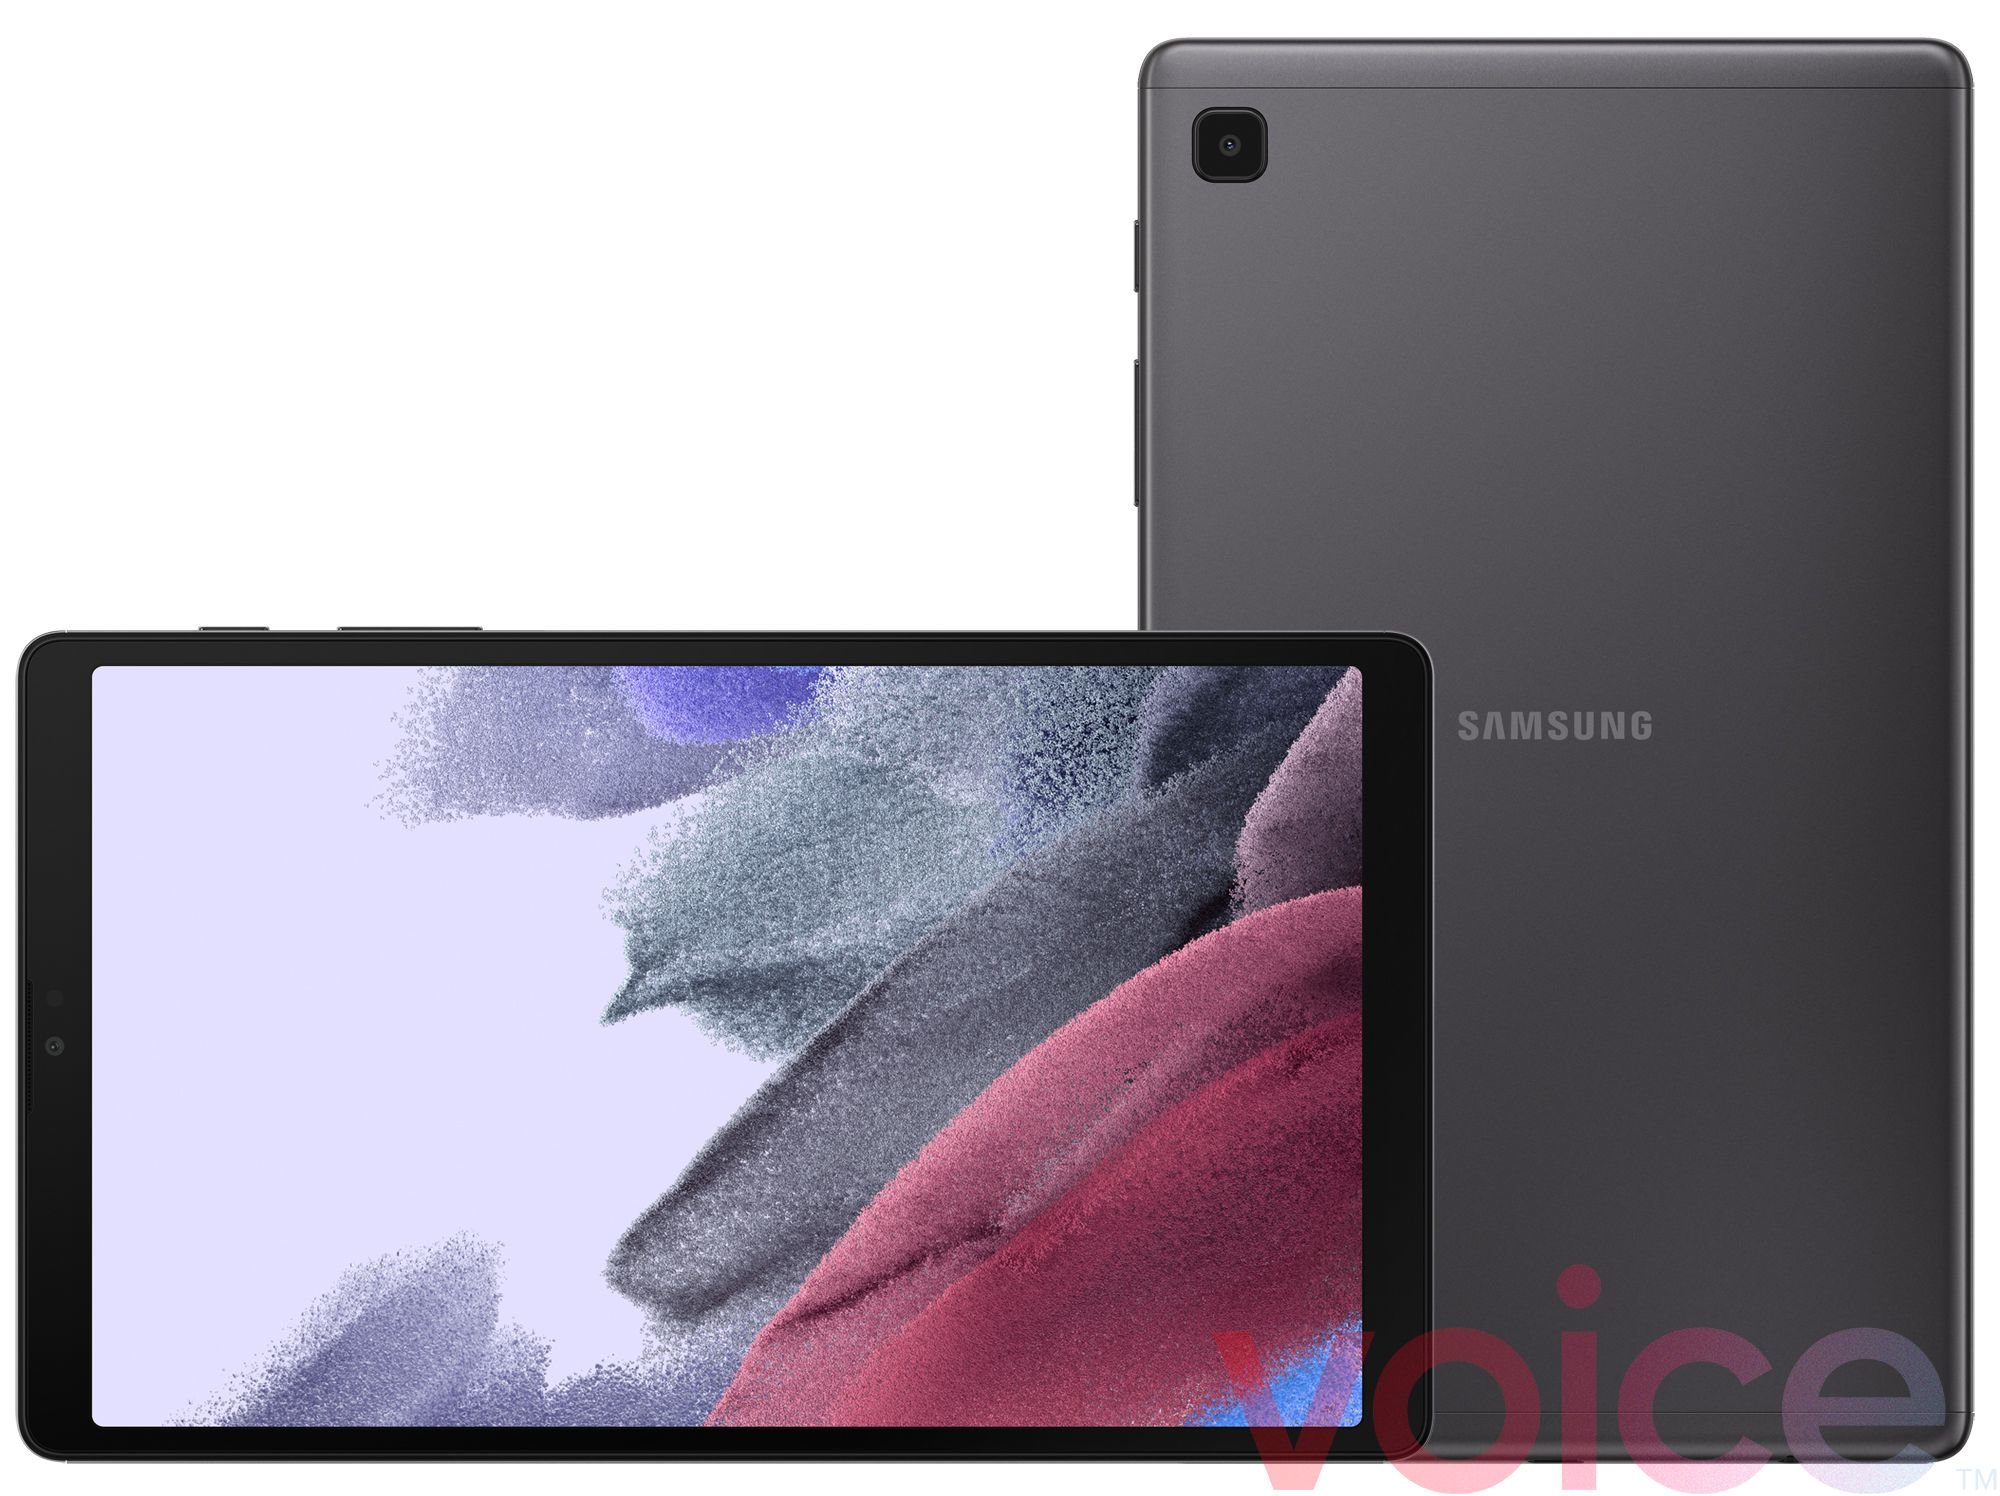 Samsung Galaxy Tab A7 Lite expected to launch soon | DroidAfrica